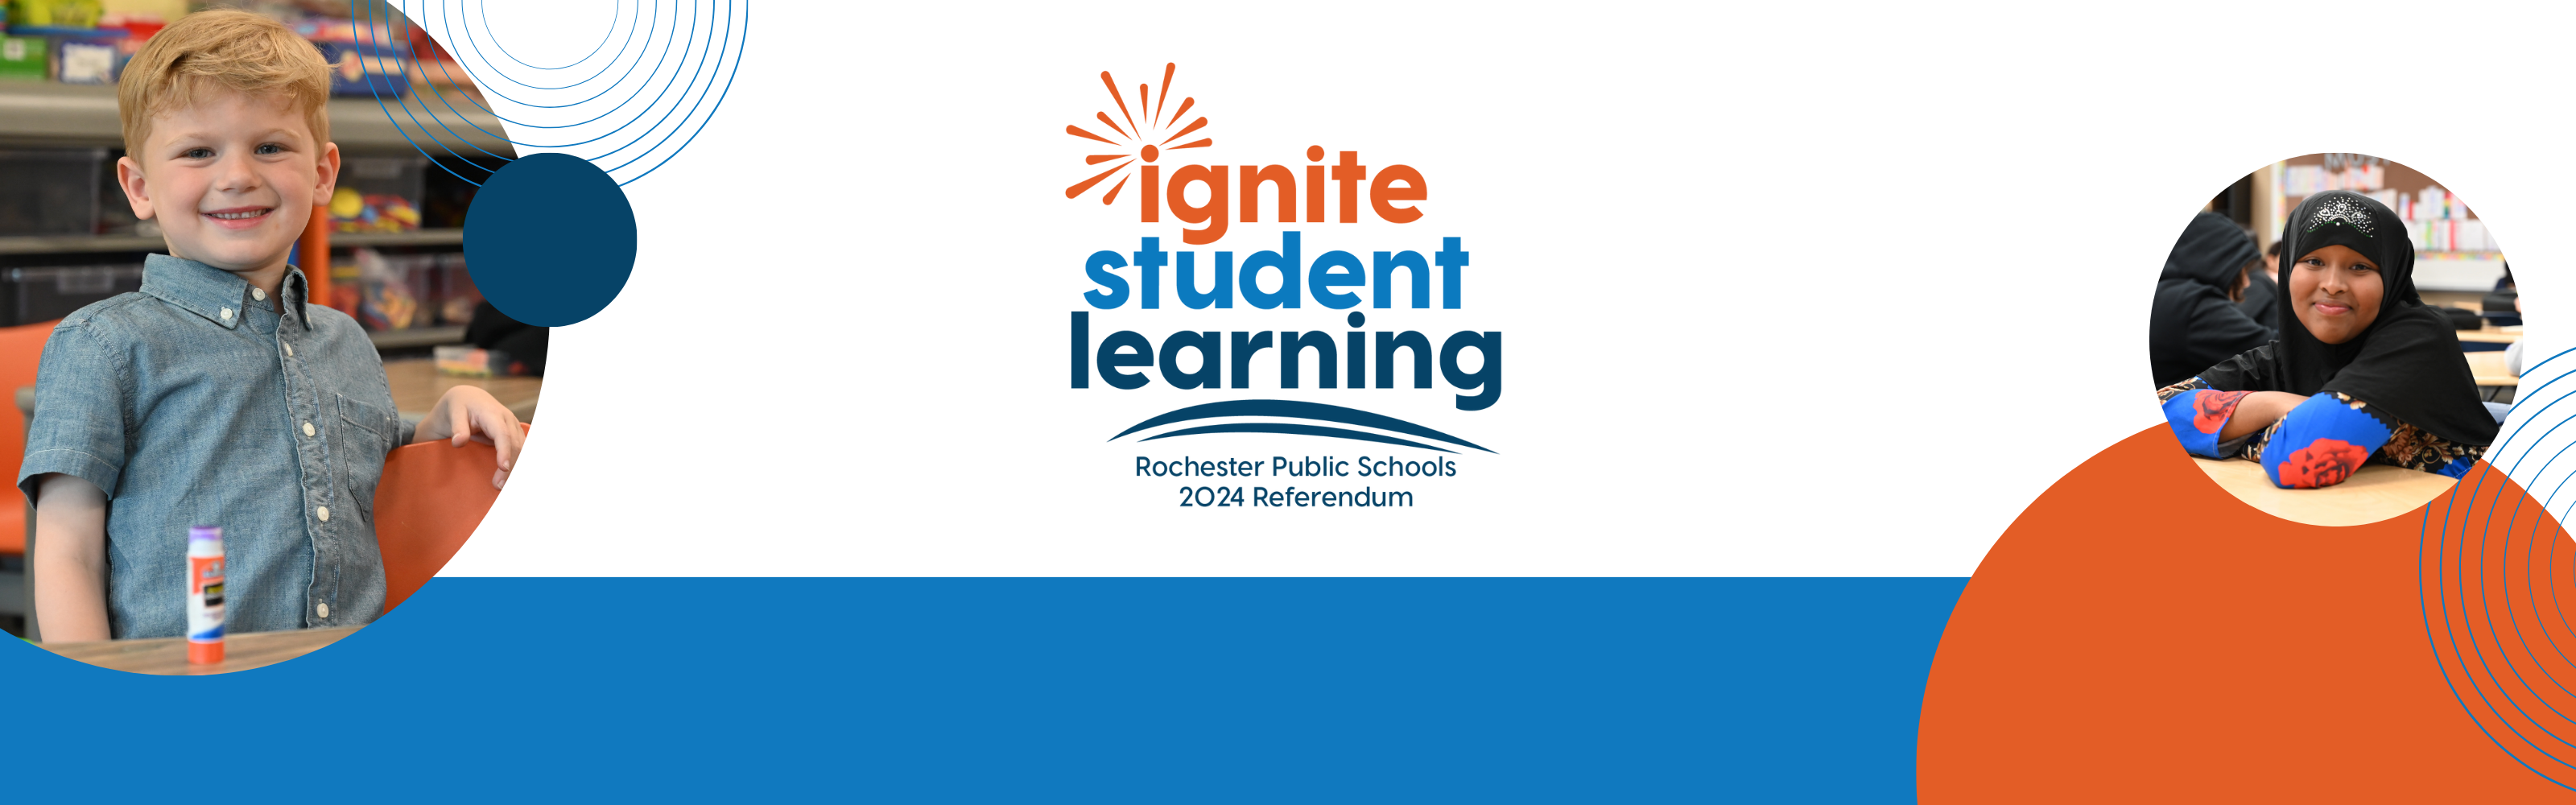 Ignite Student Learning